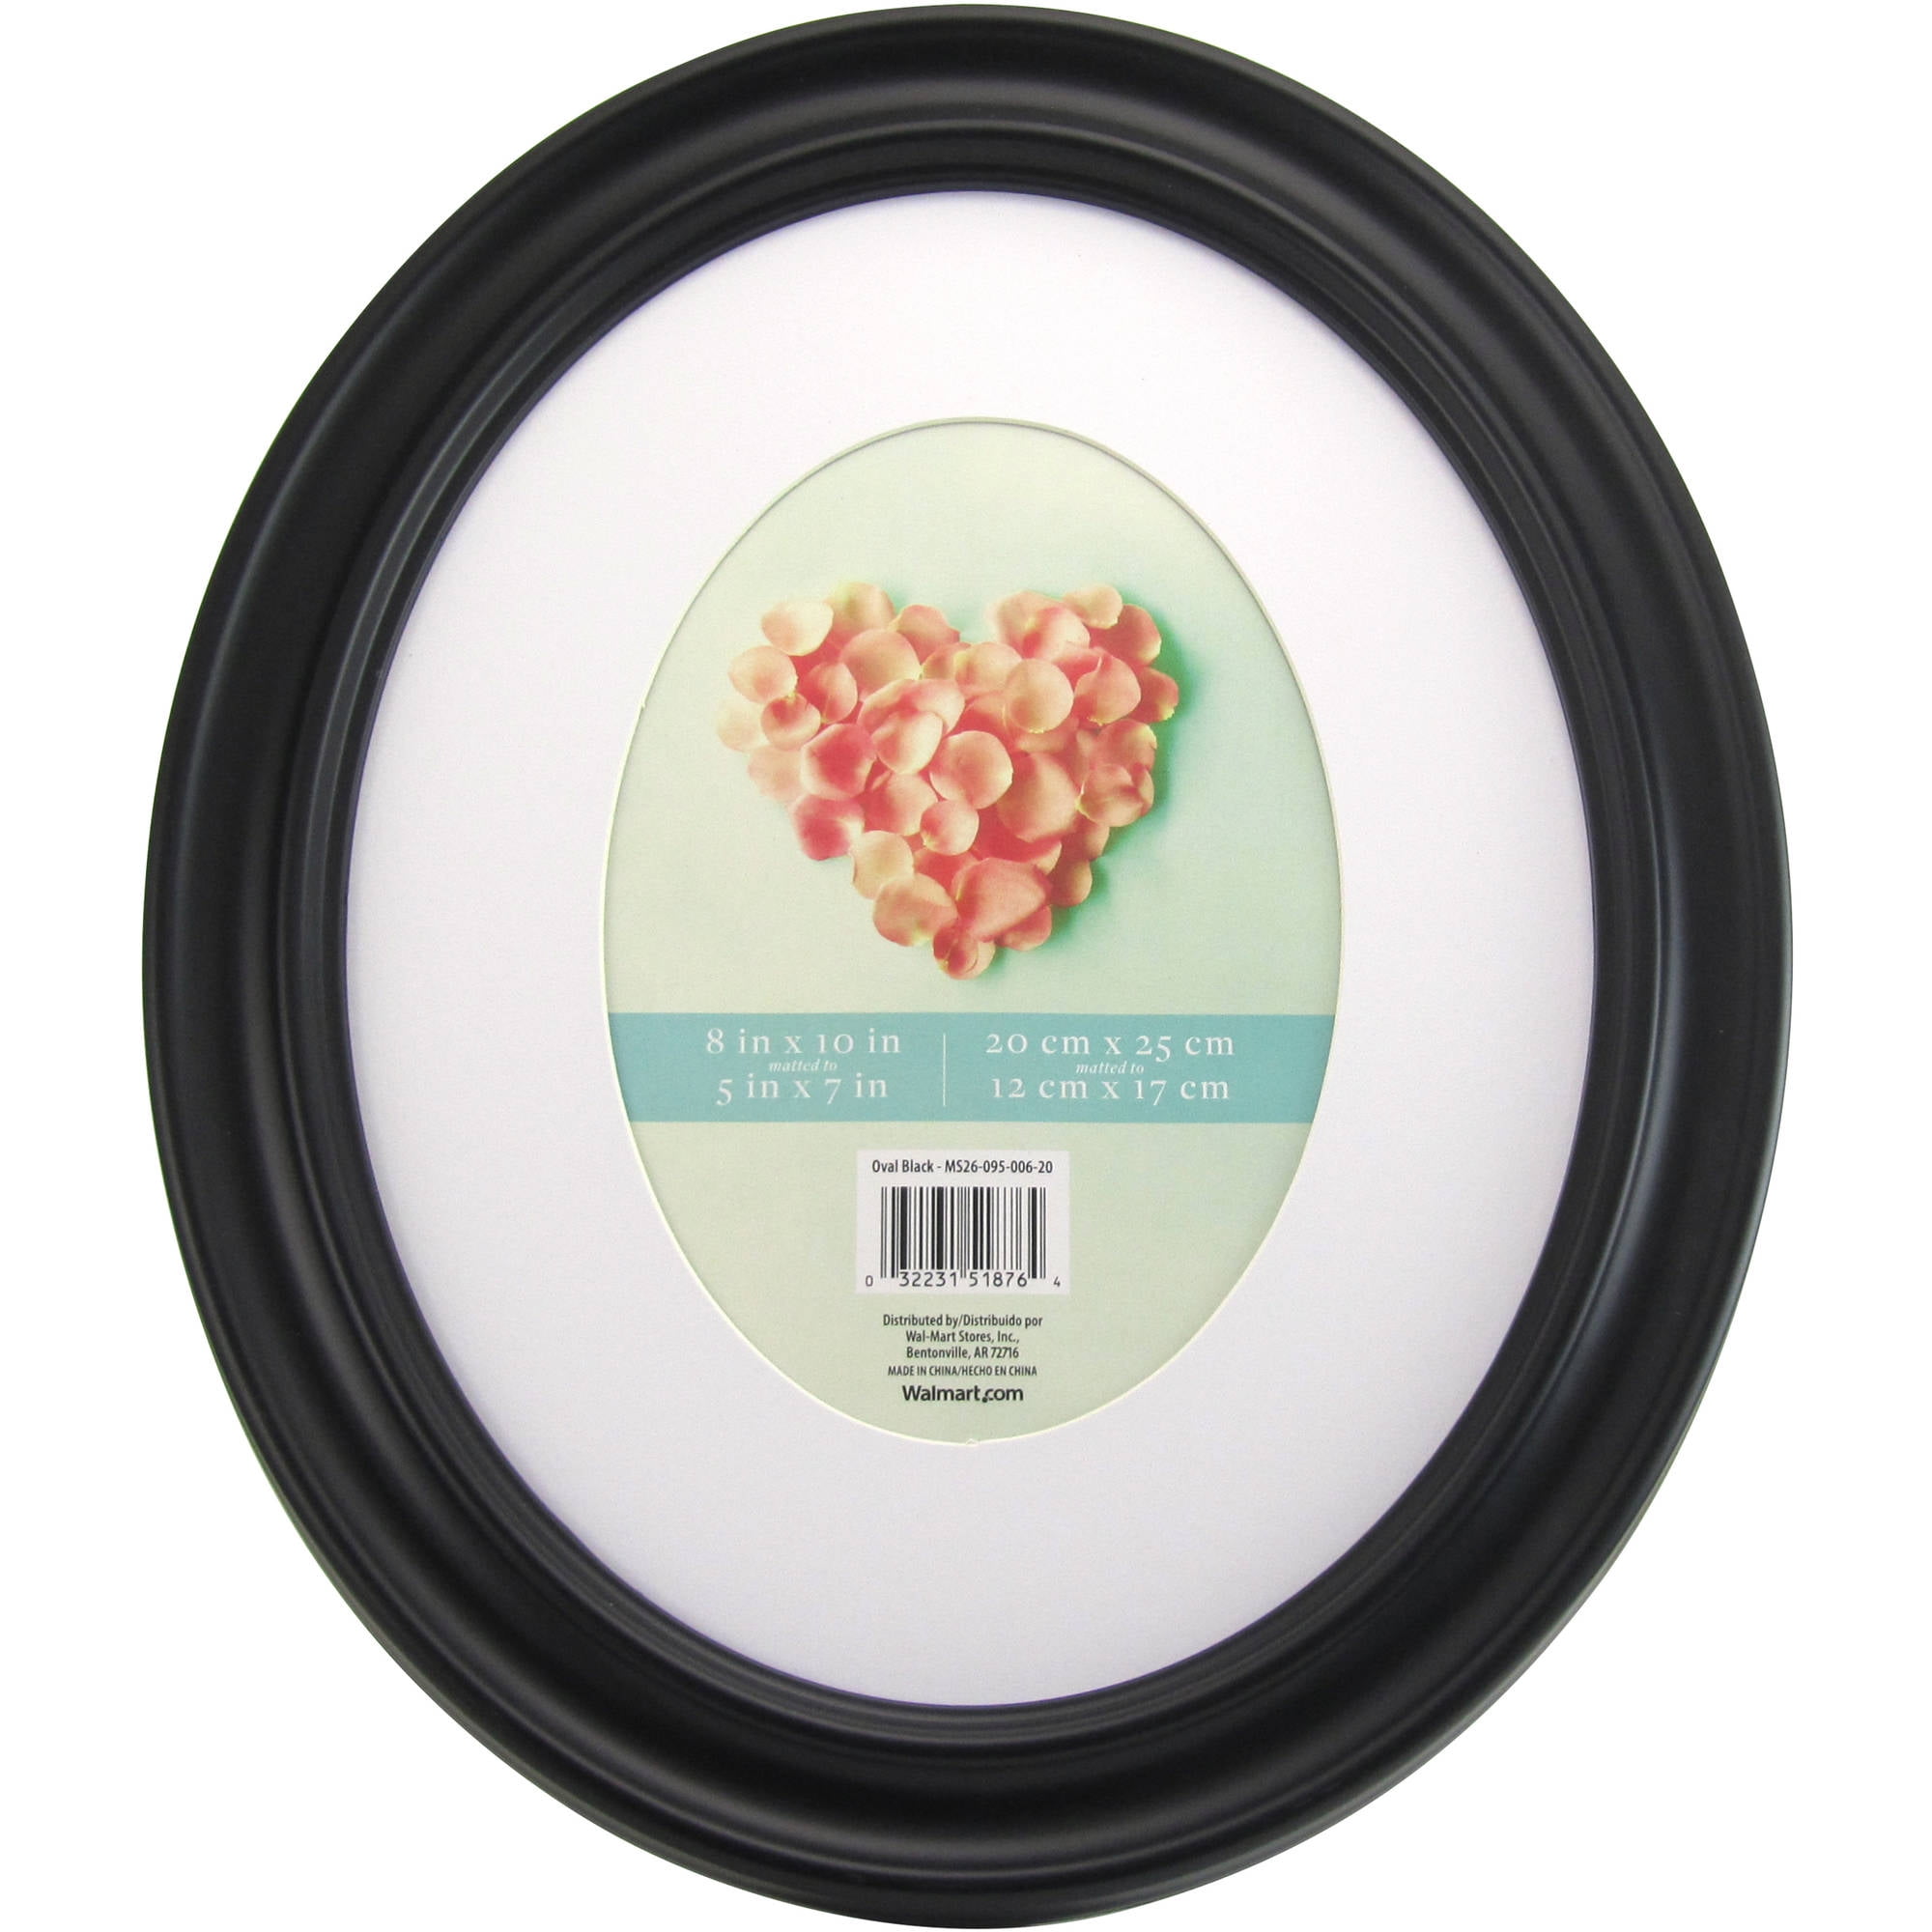 Hangers Included 8x10 Matted to 5x7 Holmgren Oval Picture Frame Black 